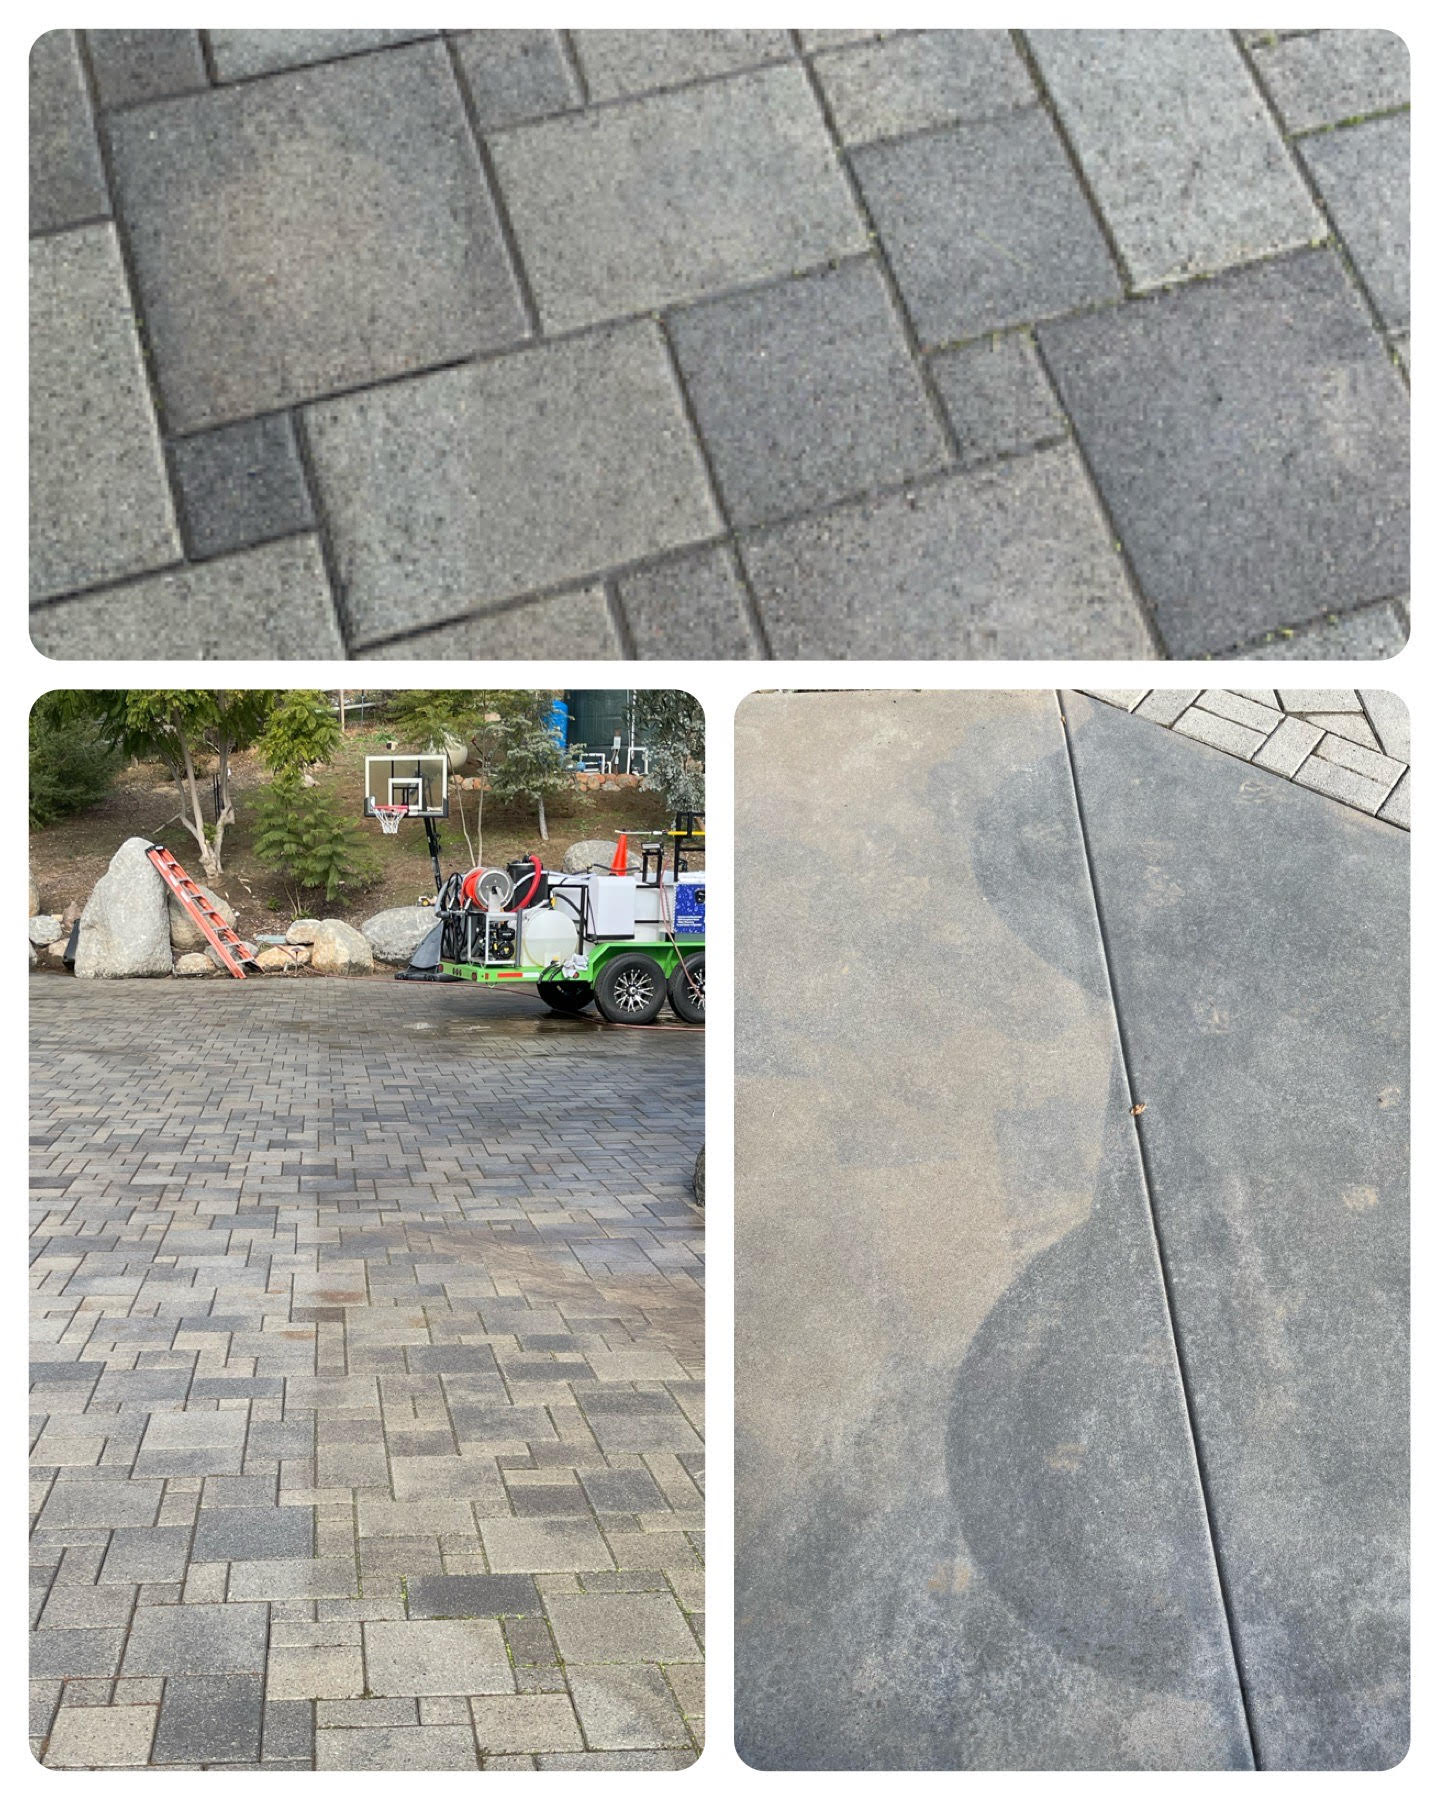 6000 sqft Residential Paver Driveway Cleaning in Ramona, CA